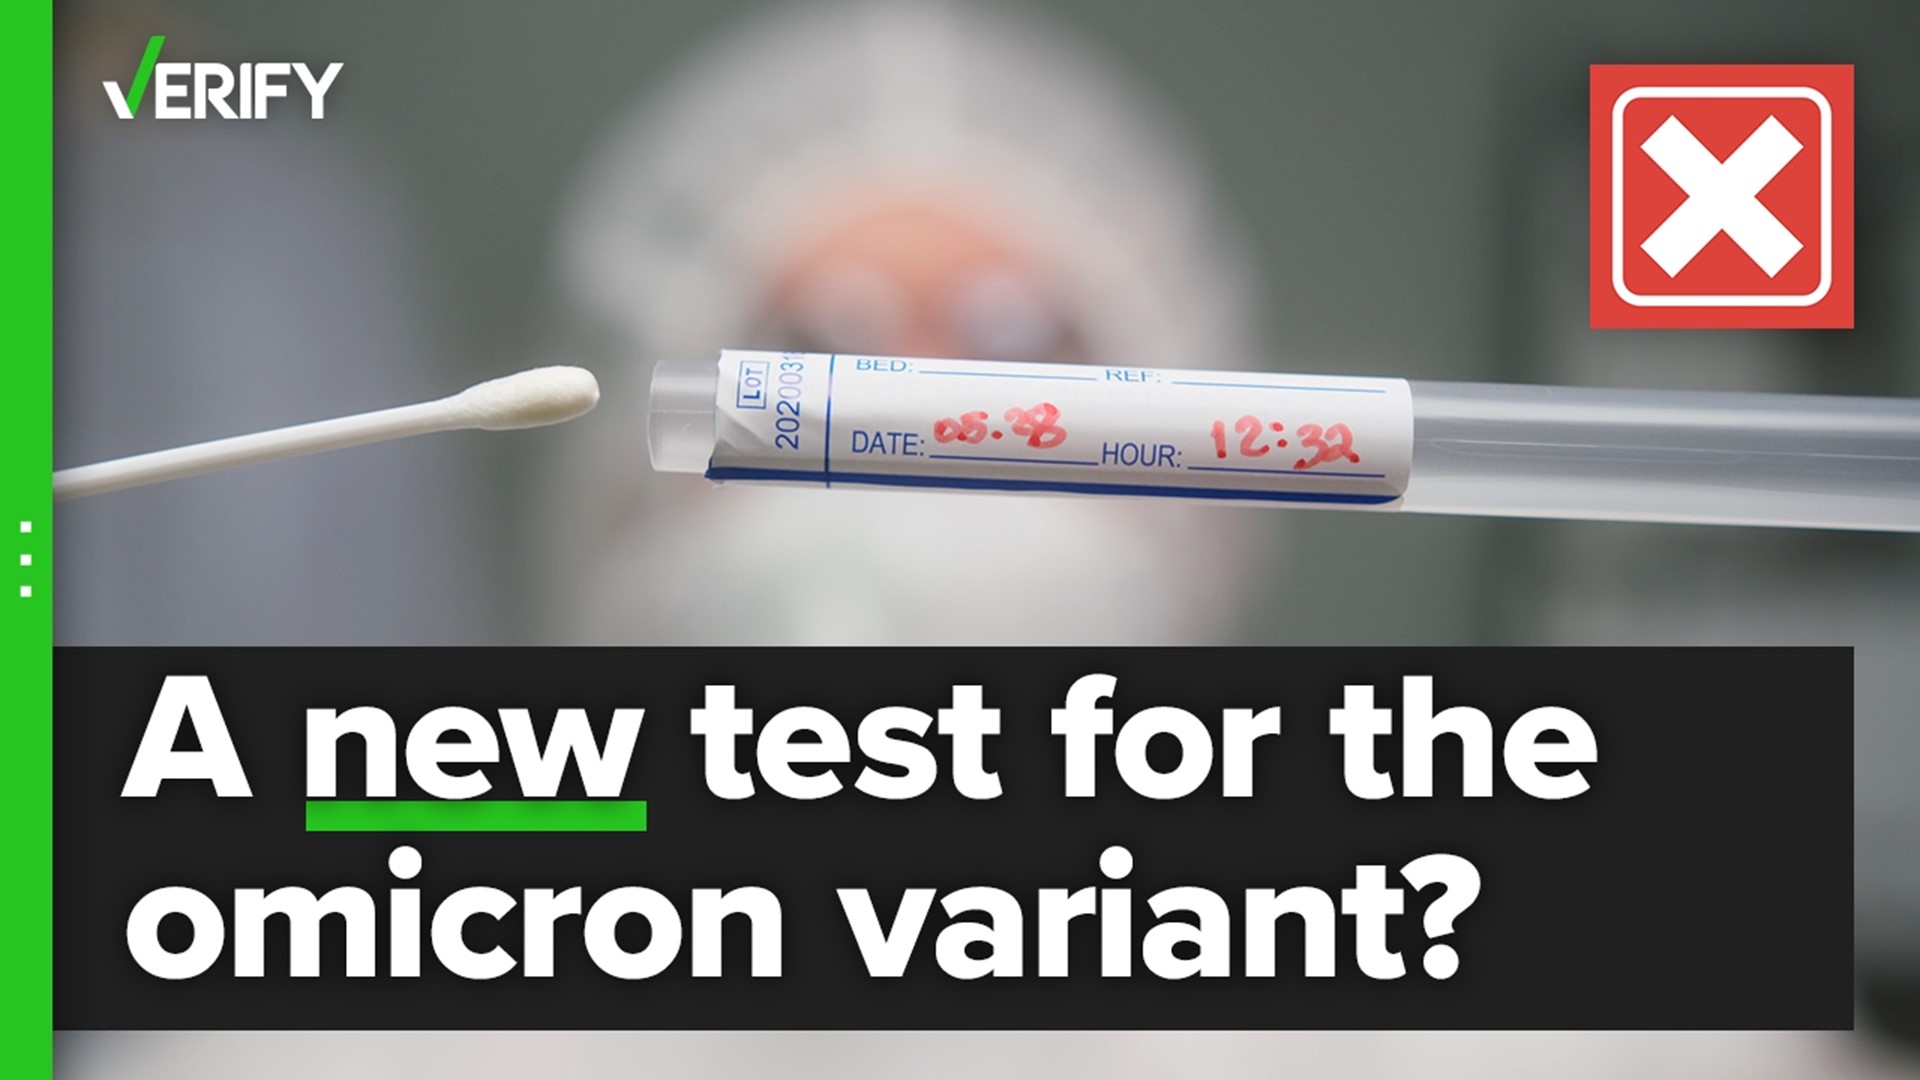 Is there a new test to detect the omicron variant? The VERIFY team confirms this is false.